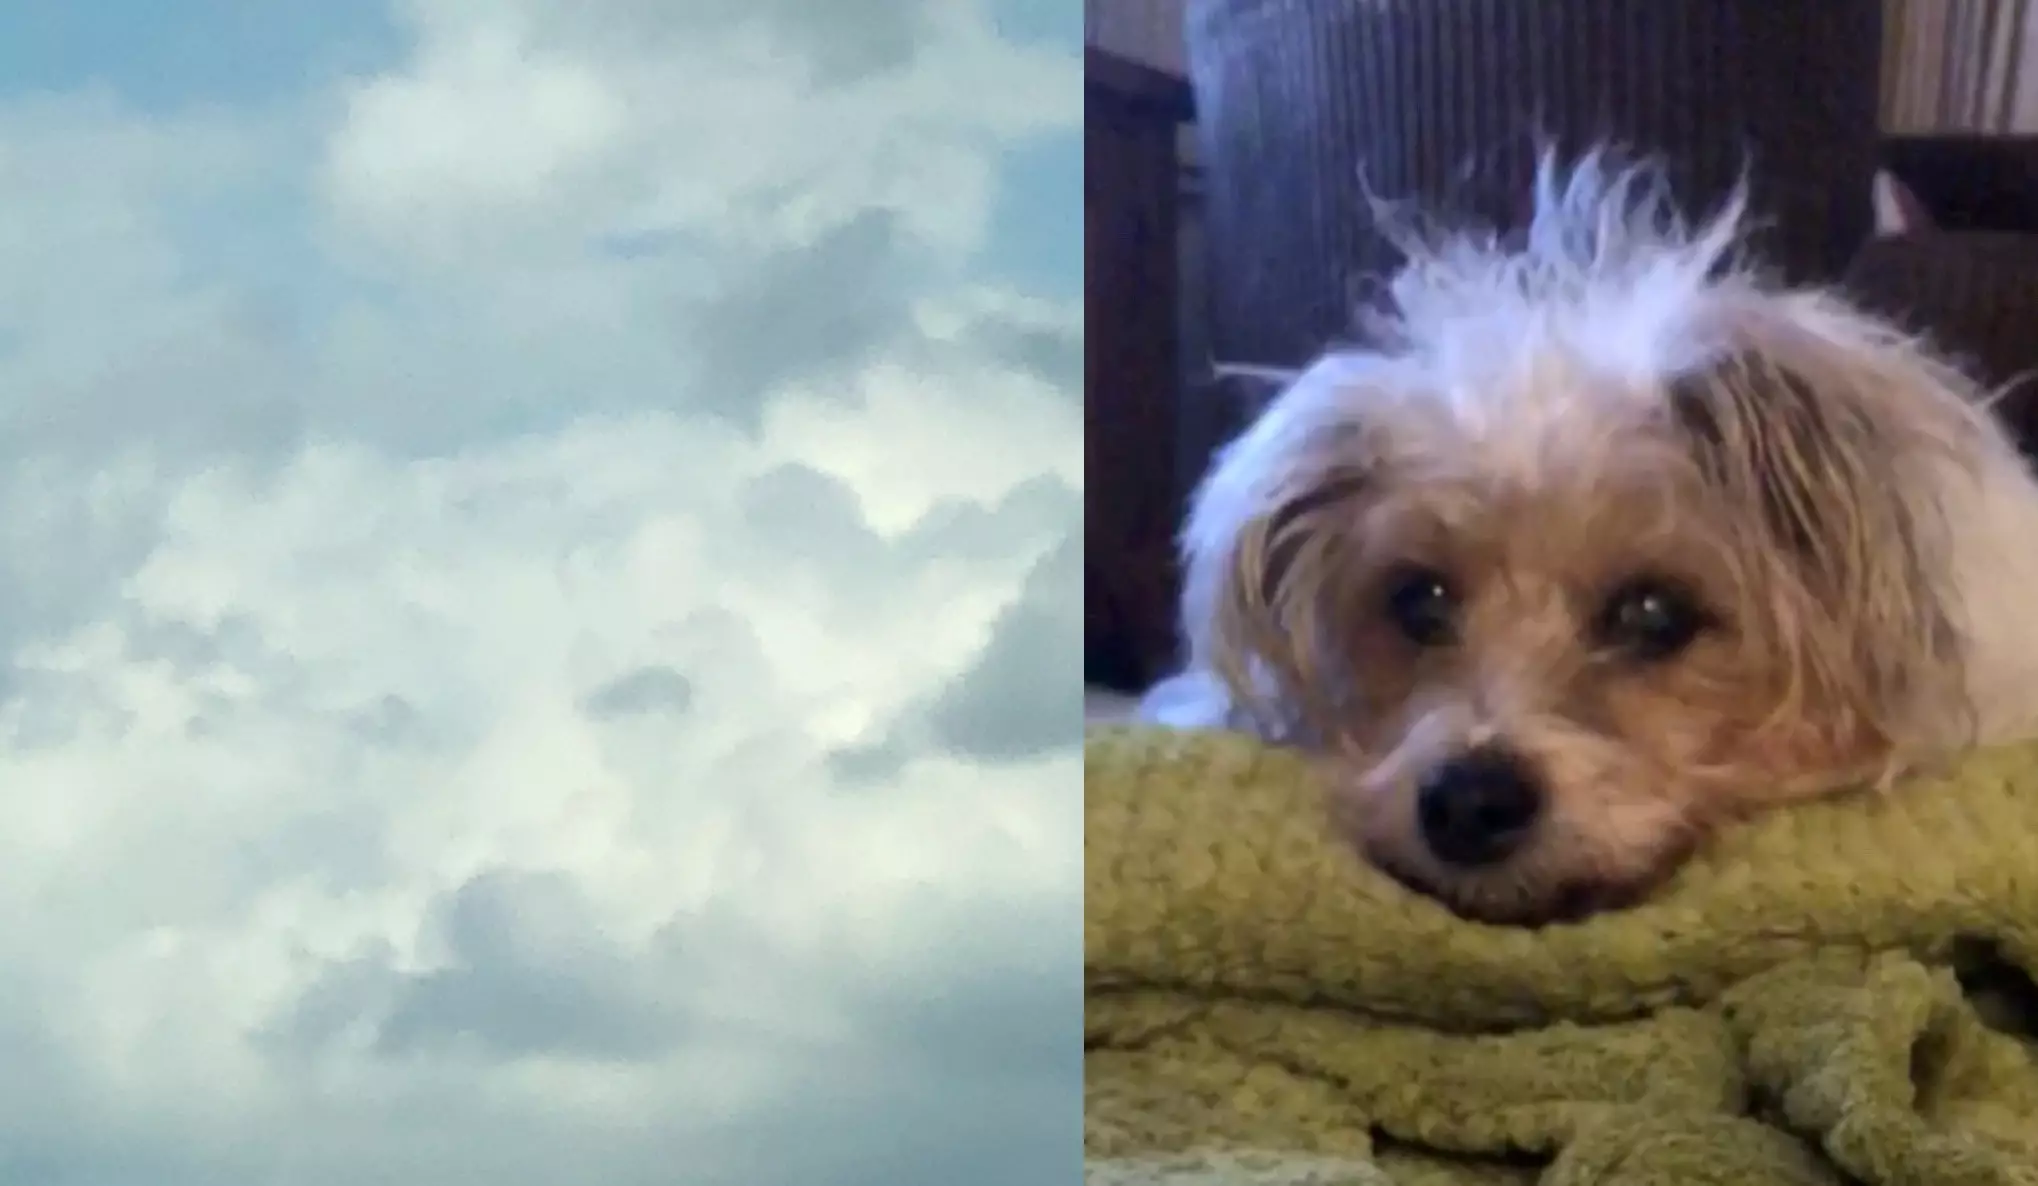 Sunny's face appeared in the clouds.